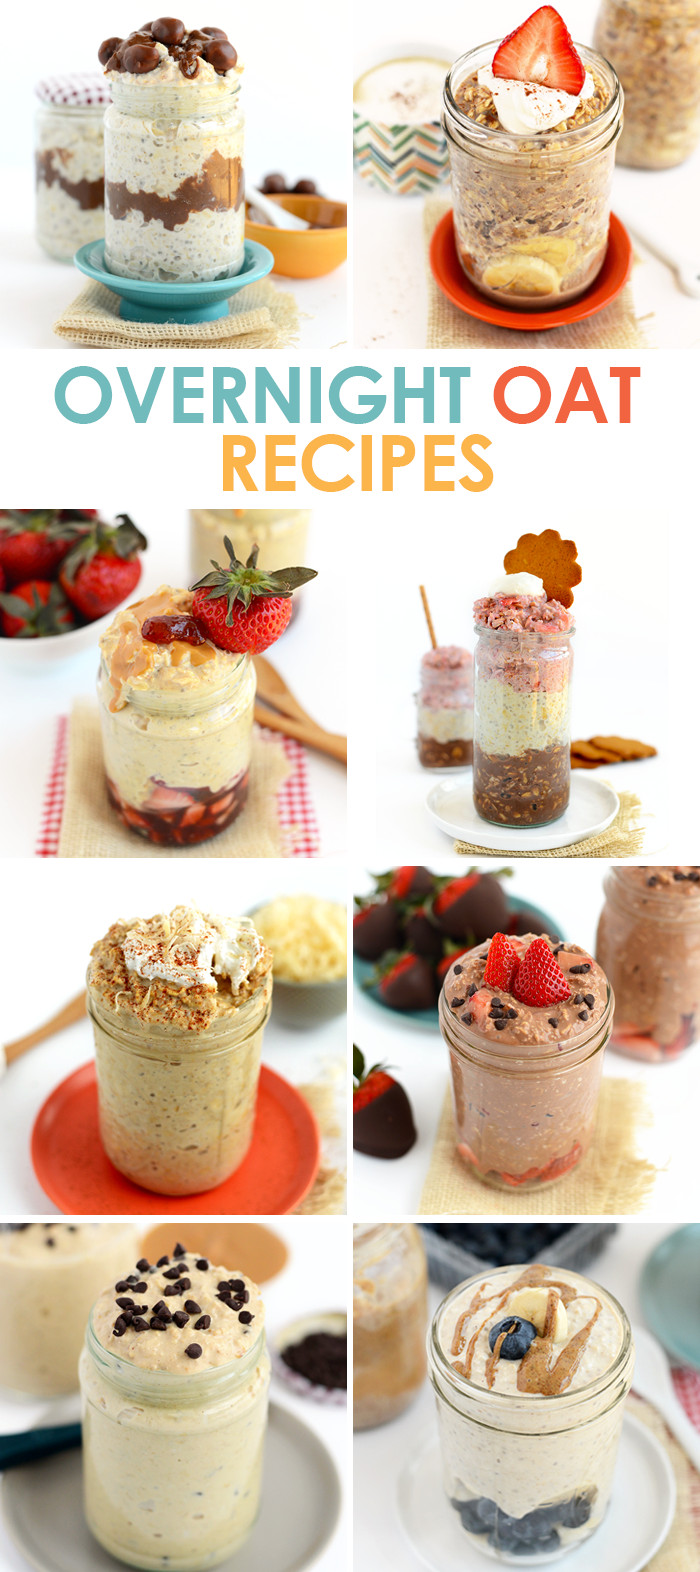 Healthy Overnight Oats Recipes
 8 Ways to Eat Overnight Oats Fit Foo Finds